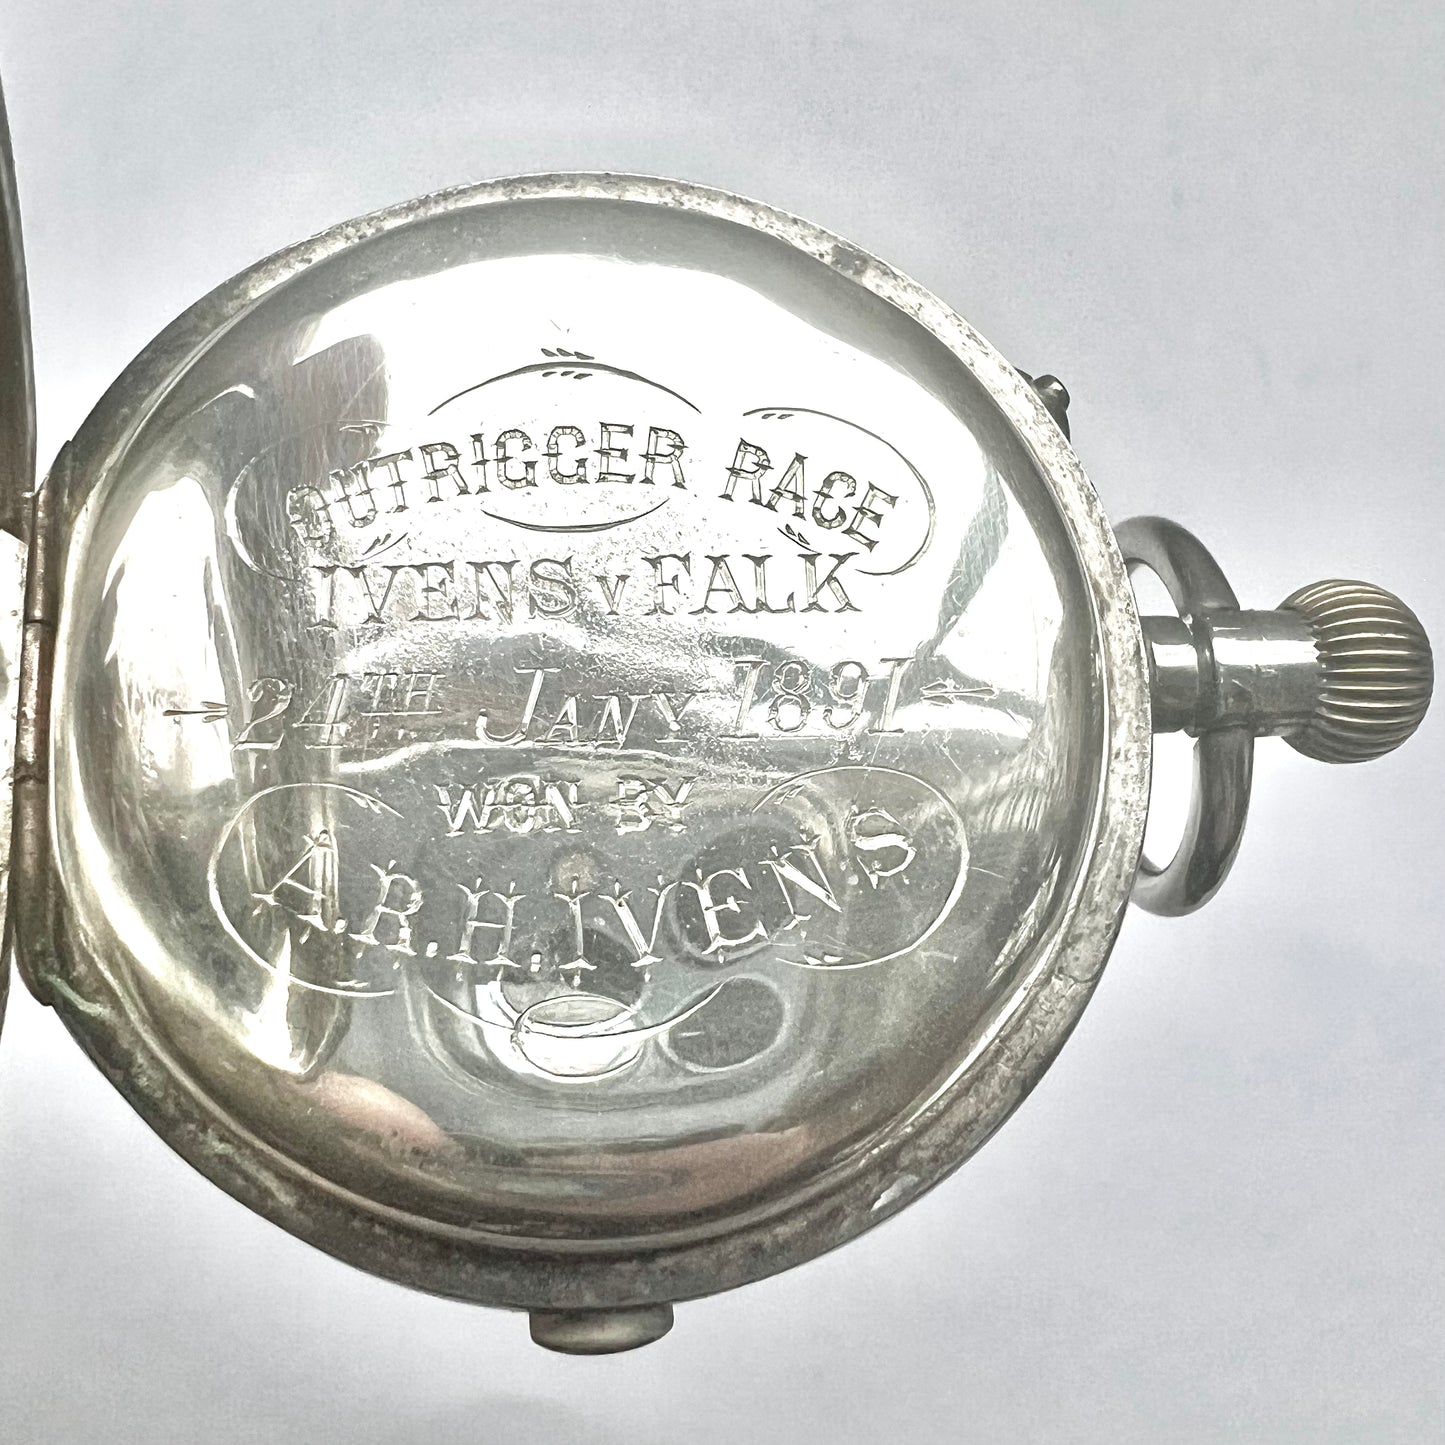 Rare antique Australian stopwatch in .935 silver case, Retailed by Stevenson Brothers, Prize for Leichardht Regatta 1891